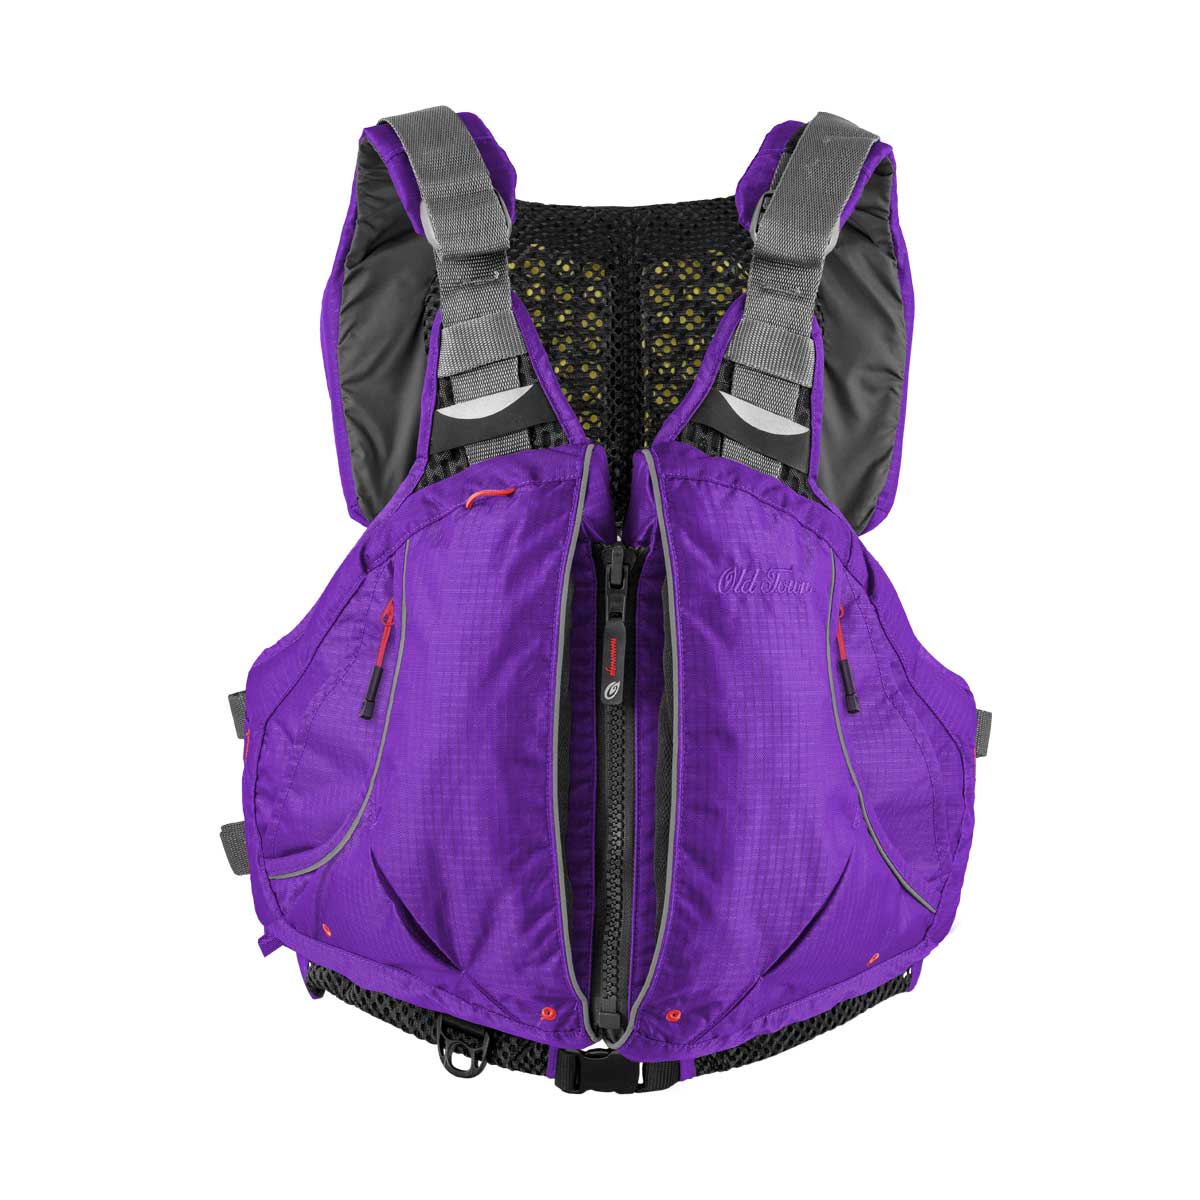 OLD TOWN WOMEN'S SOLITUDE PFD